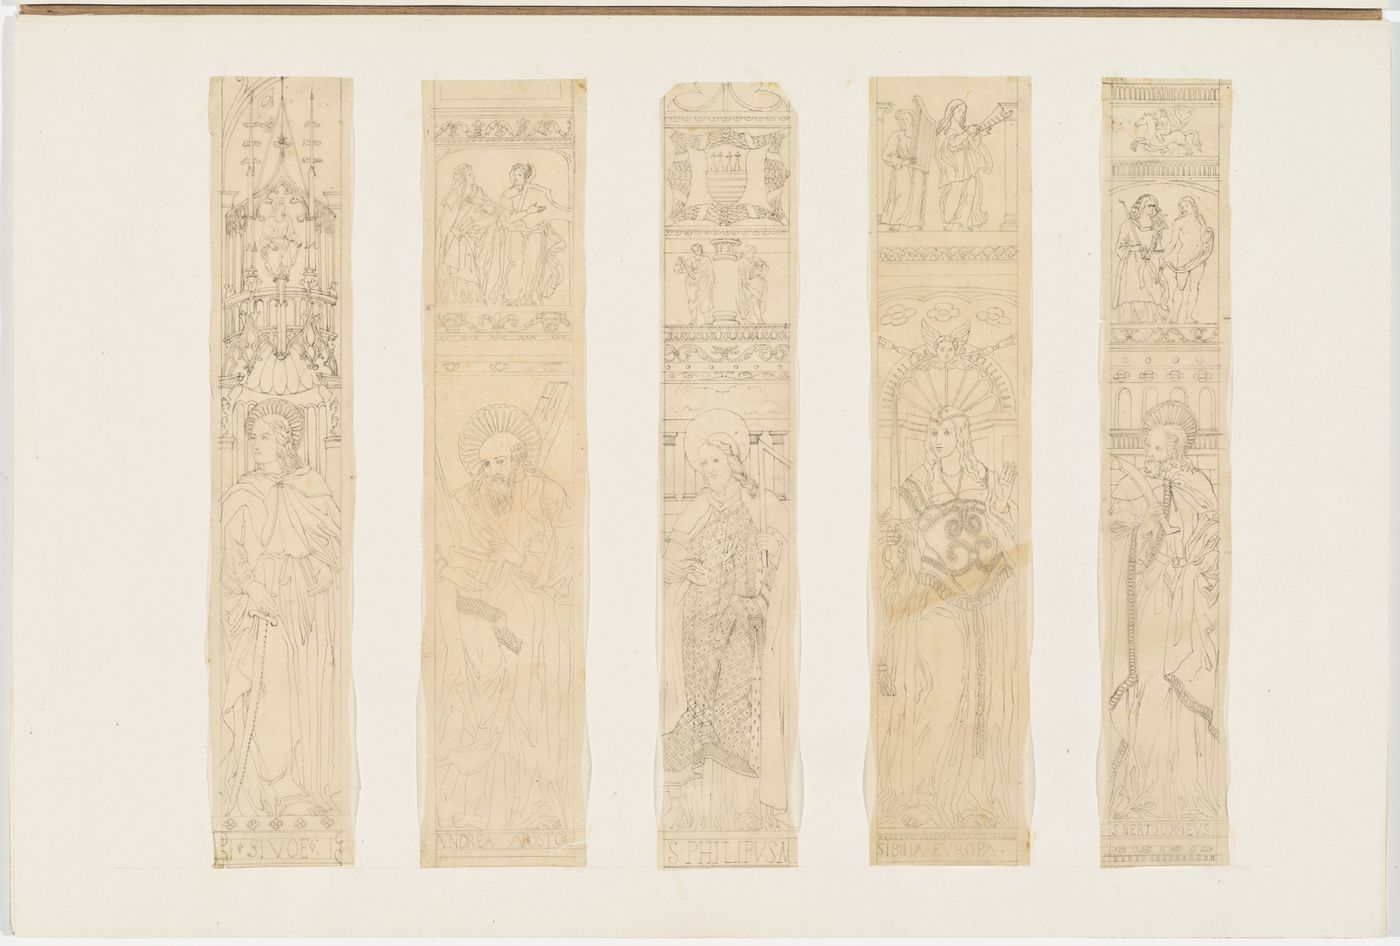 Five drawings of Christian saints and one sibyl, probably from stained glass: an unidentified female saint; St. Andrew; St. Phillip; St.Bartholomew; and Sibyl-Europa